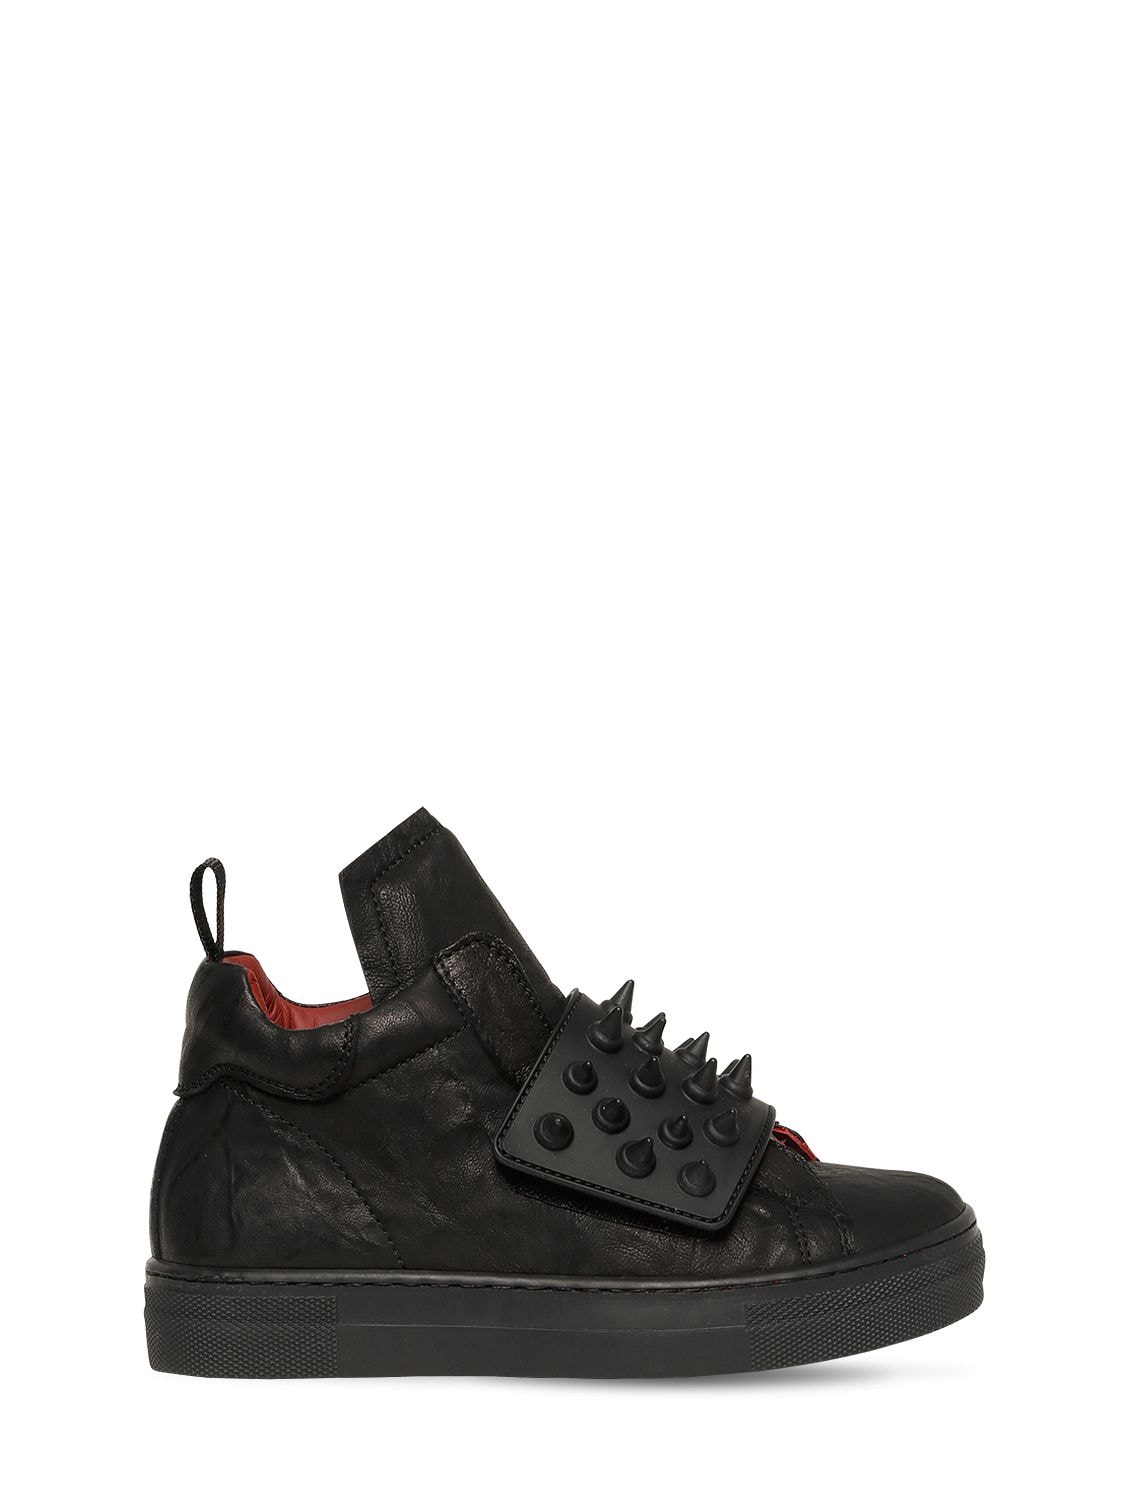 Am 66 Kids' Spiked Leather High Top Sneakers In Black